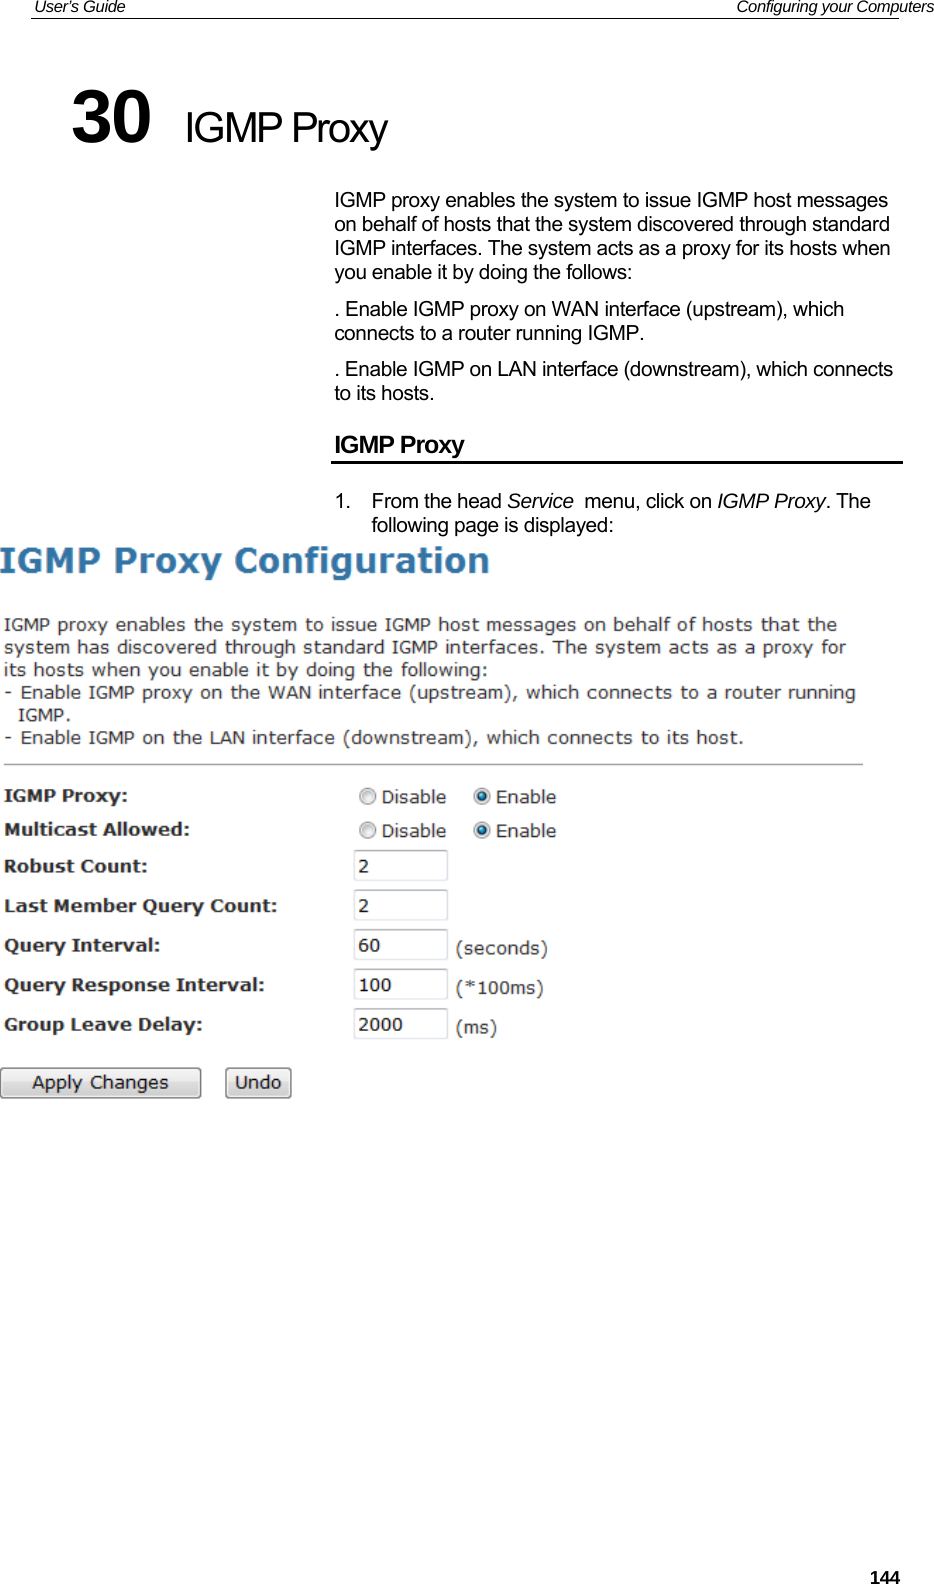 User’s Guide   Configuring your Computers 30  IGMP Proxy IGMP proxy enables the system to issue IGMP host messages on behalf of hosts that the system discovered through standard IGMP interfaces. The system acts as a proxy for its hosts when you enable it by doing the follows: . Enable IGMP proxy on WAN interface (upstream), which connects to a router running IGMP. . Enable IGMP on LAN interface (downstream), which connects to its hosts. IGMP Proxy 1. From the head Service  menu, click on IGMP Proxy. The following page is displayed:              144